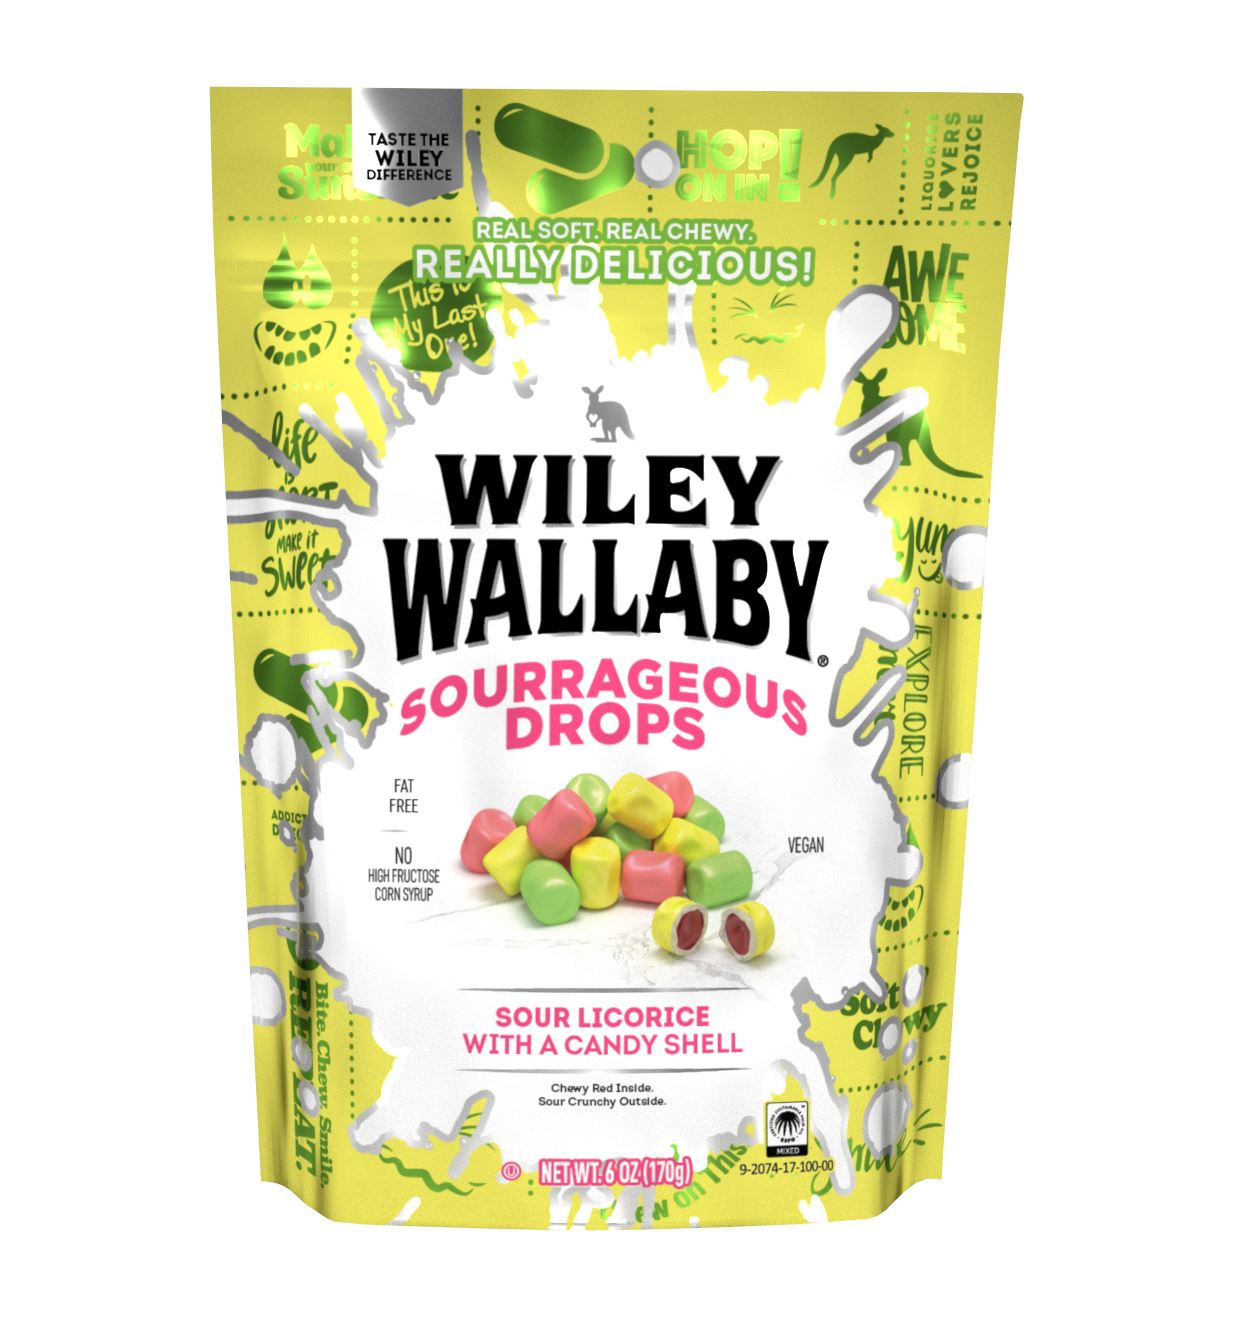 Wiley Wallaby Licorice Wiley Wallaby Sourrageous Drops 6 Ounce 